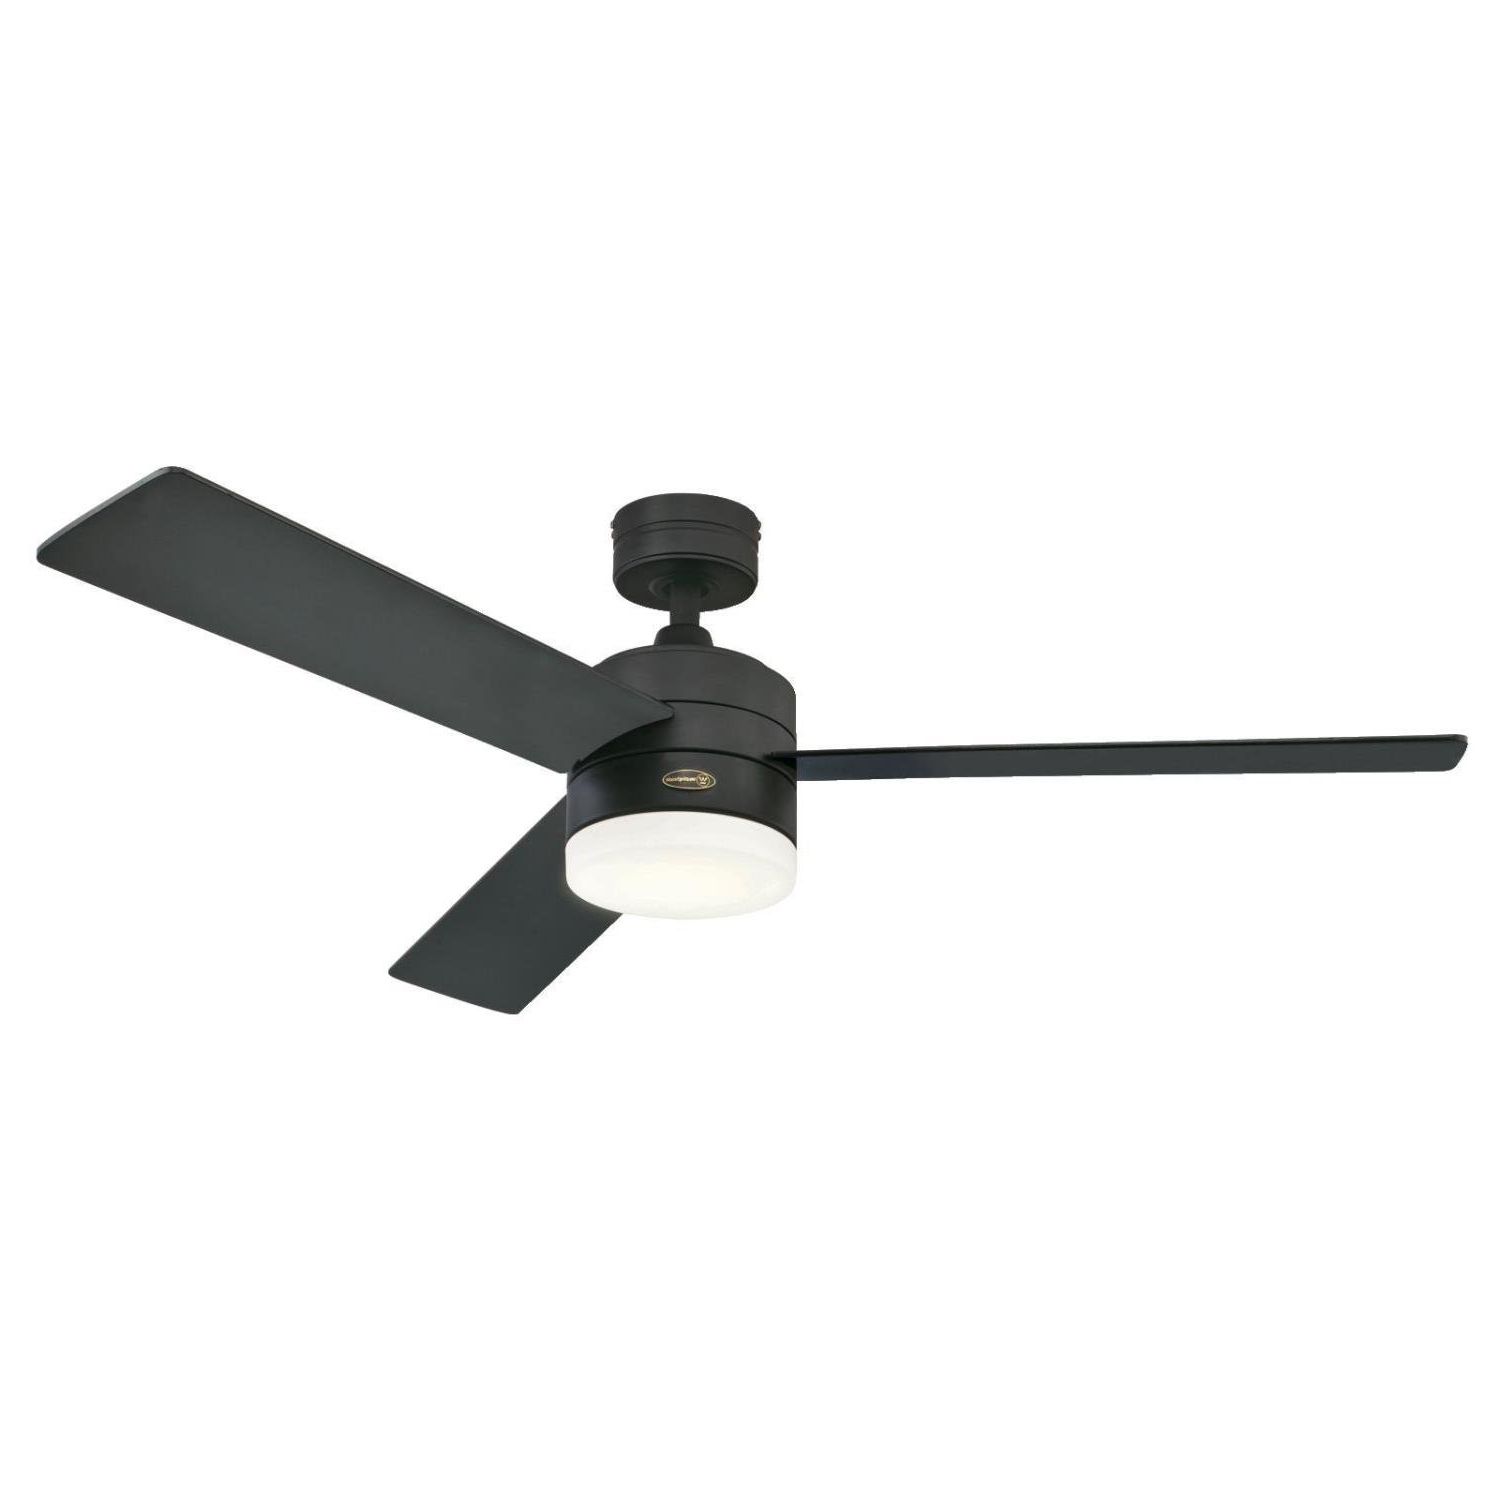 2020 52" Luray 3 Blade Ceiling Fan With Remote, Light Kit Included Intended For Windemere 5 Blade Ceiling Fans With Remote (View 9 of 20)